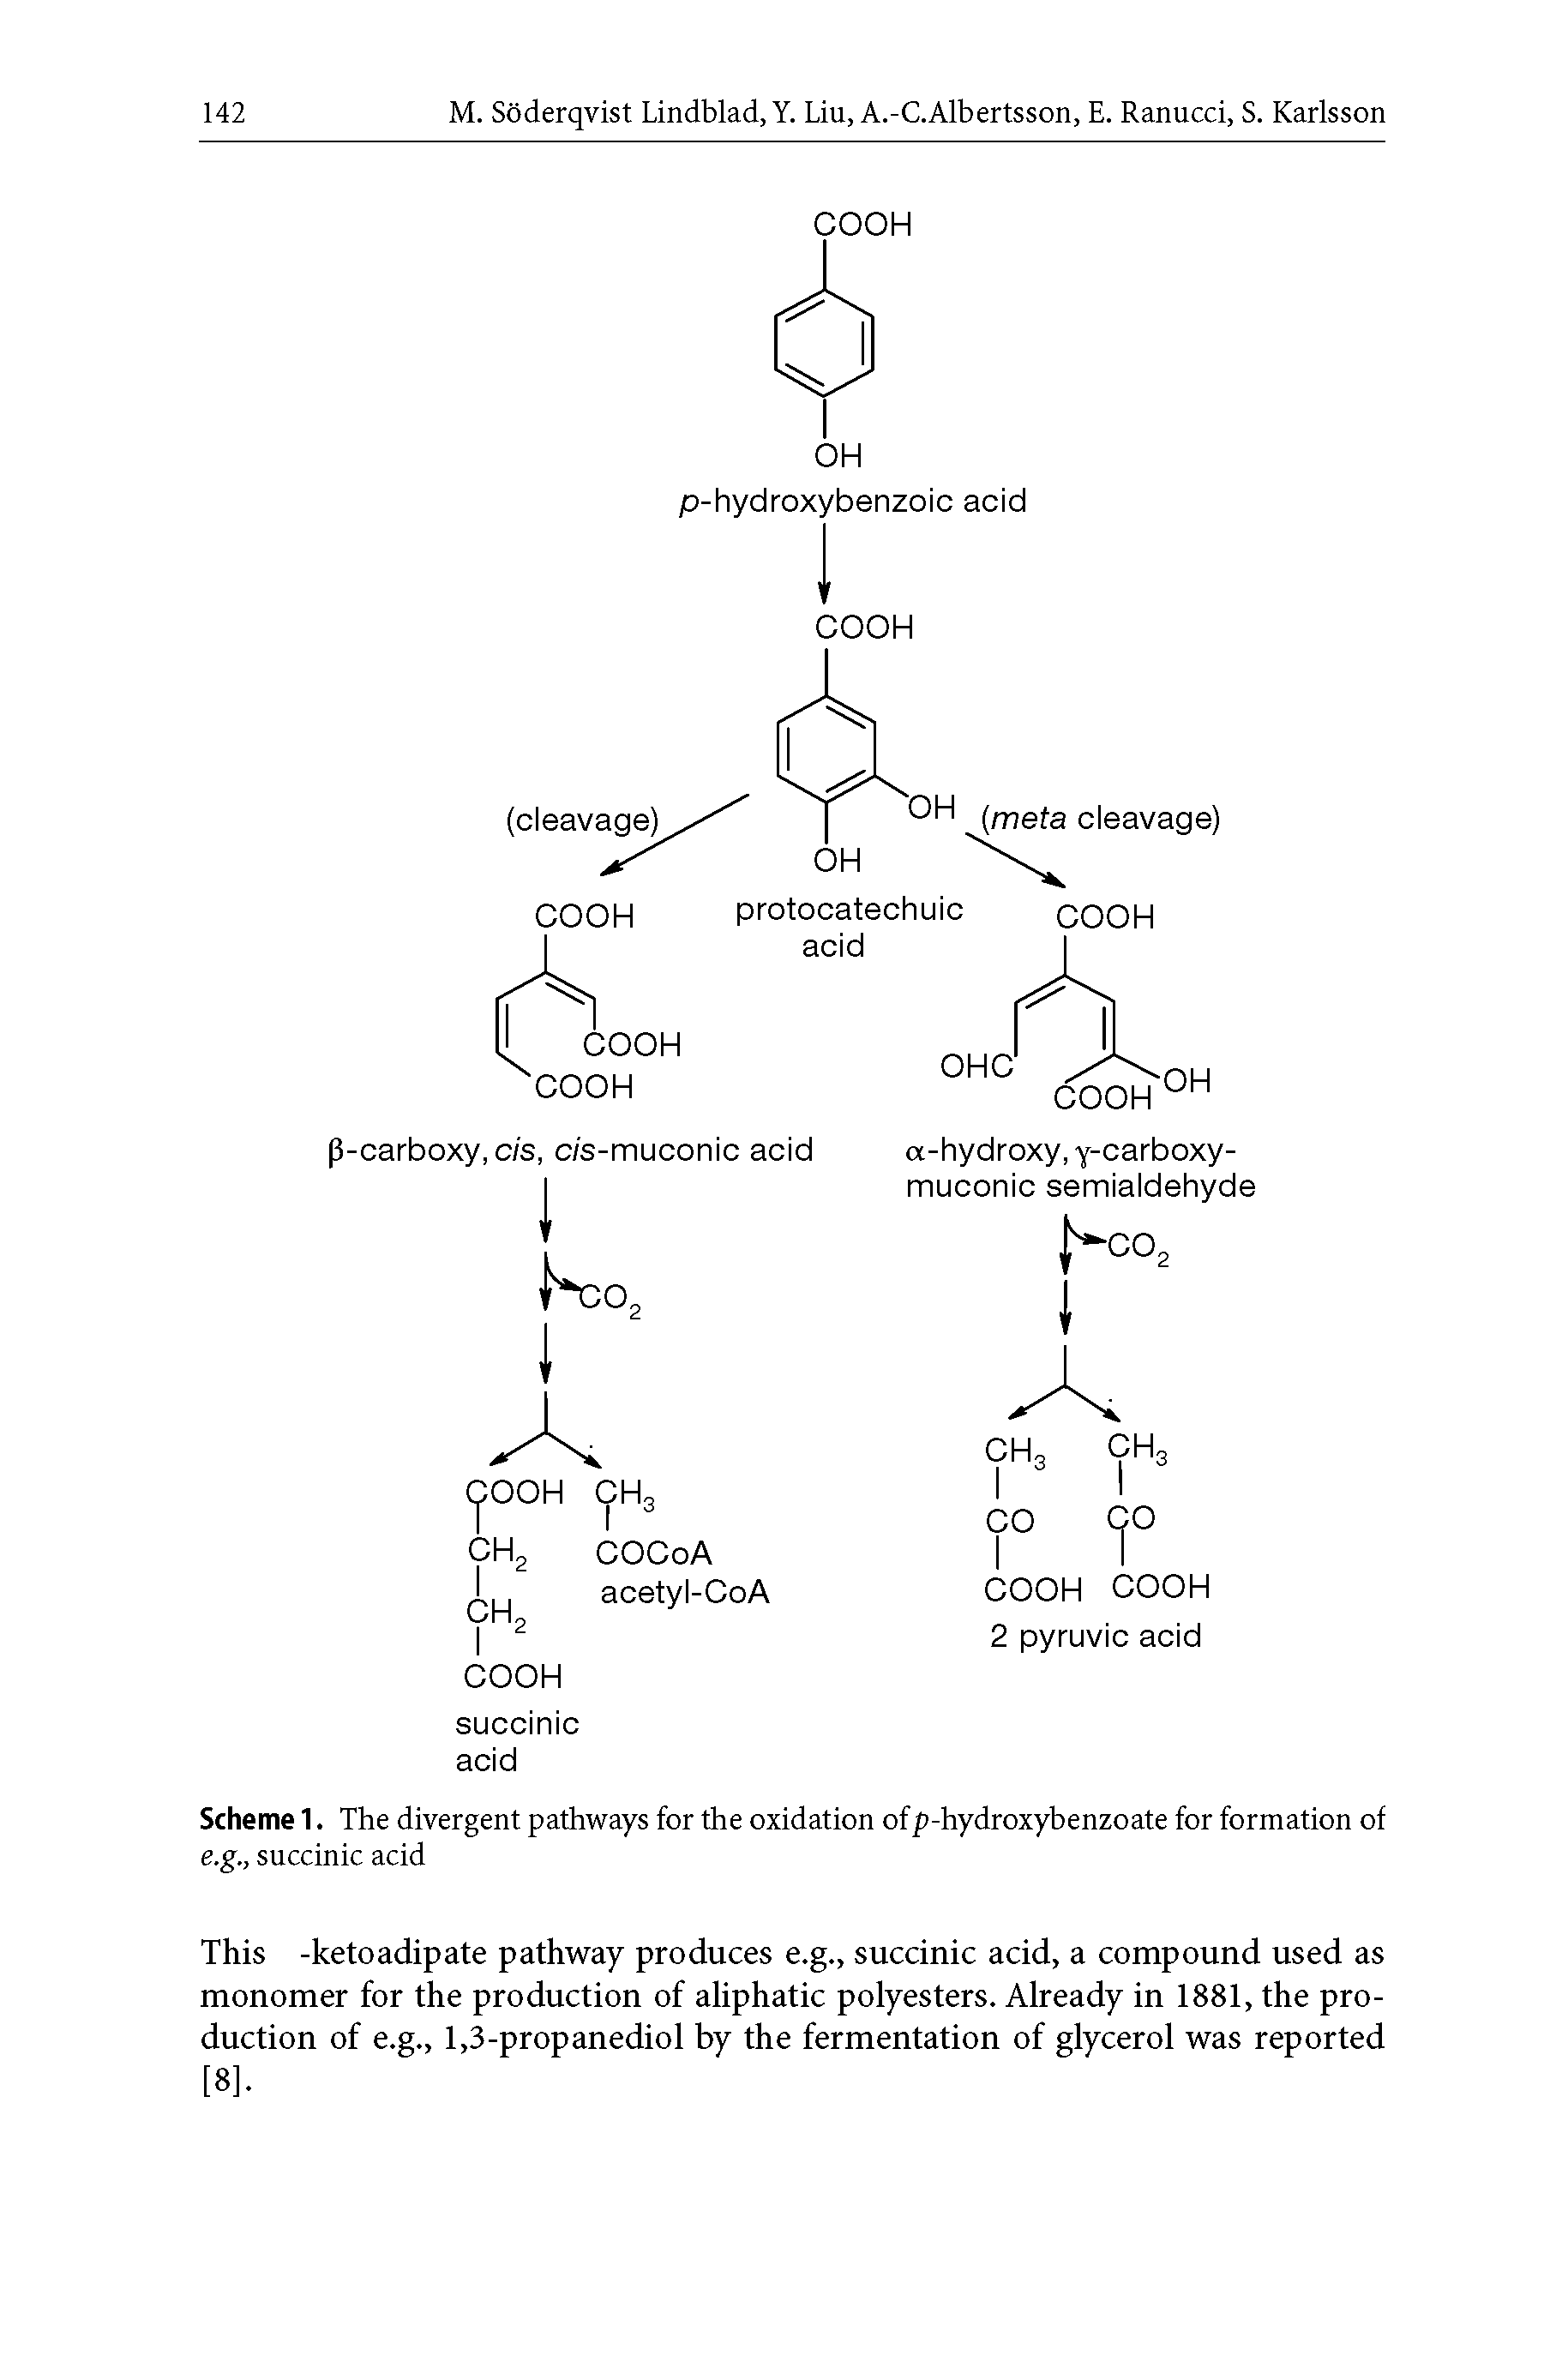 Scheme 1. The divergent pathways for the oxidation ofp-hydroxybenzoate for formation of e.g., succinic acid...